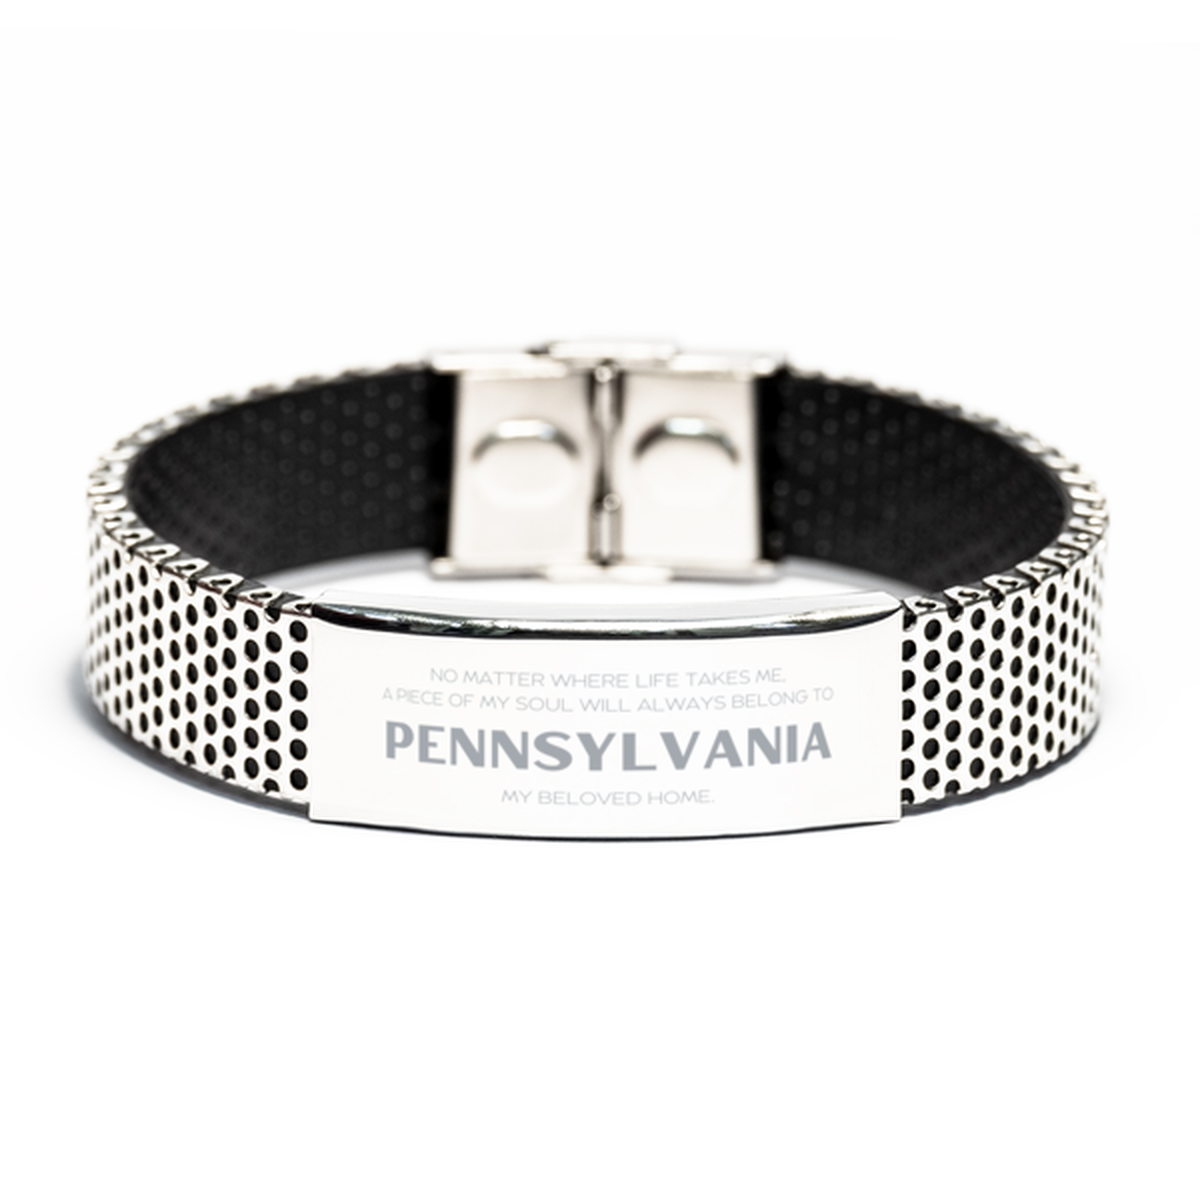 Love Pennsylvania State Gifts, My soul will always belong to Pennsylvania, Proud Stainless Steel Bracelet, Birthday Unique Gifts For Pennsylvania Men, Women, Friends